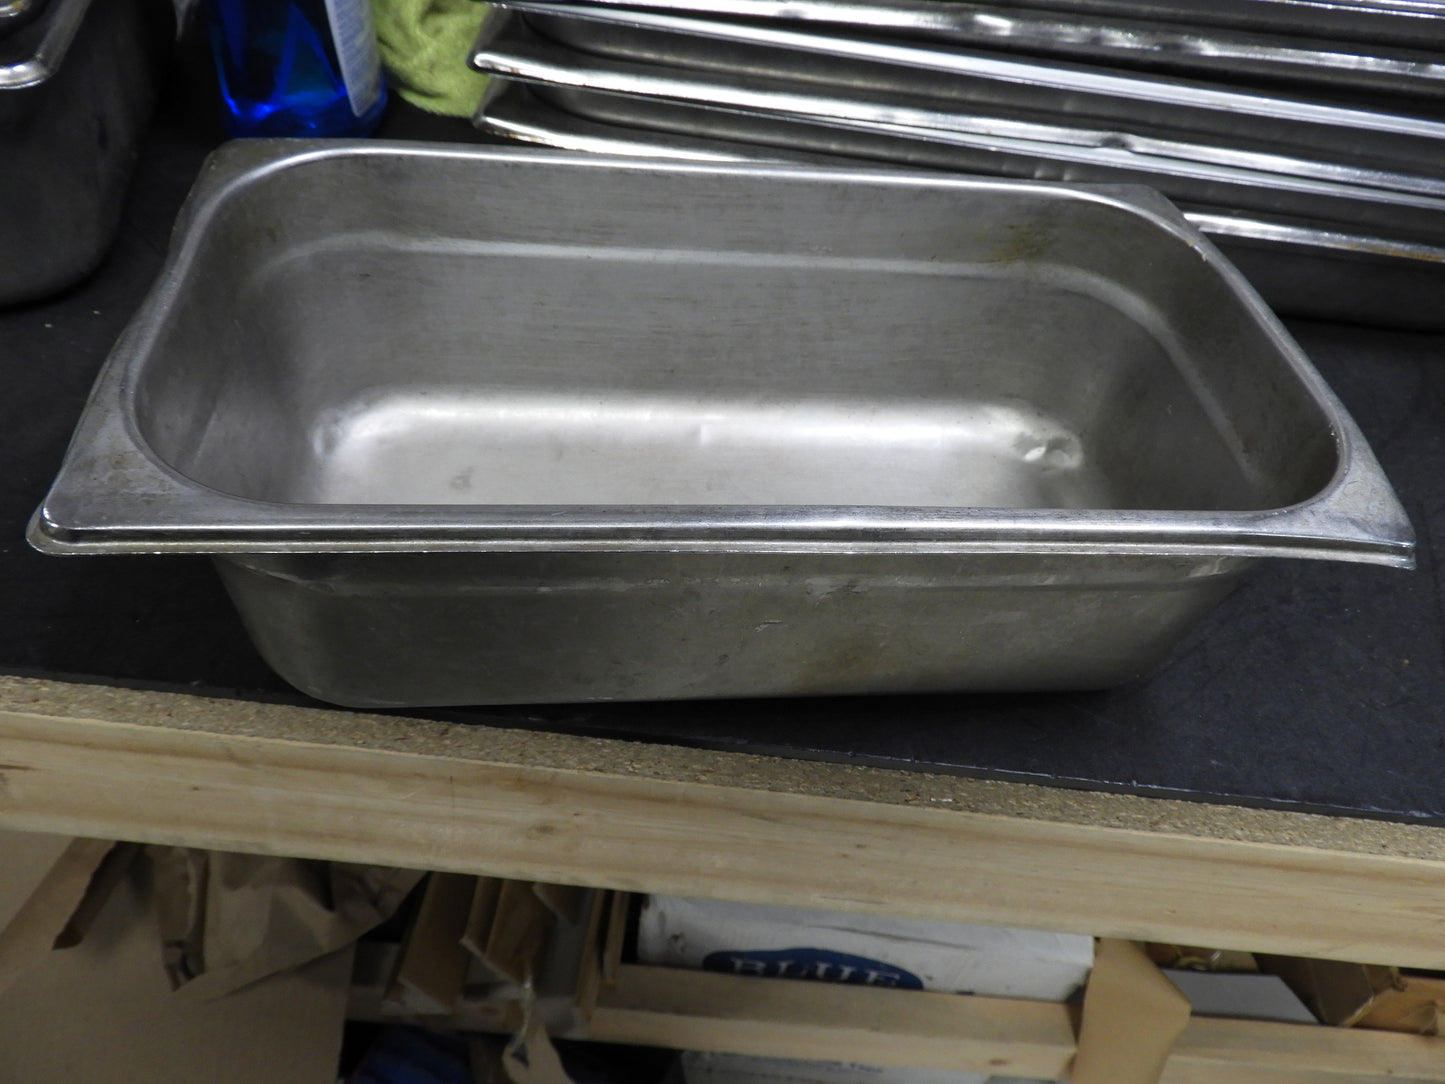 1/3 Size Stainless Steel Steam Table / Hotel Pan - 4" Deep